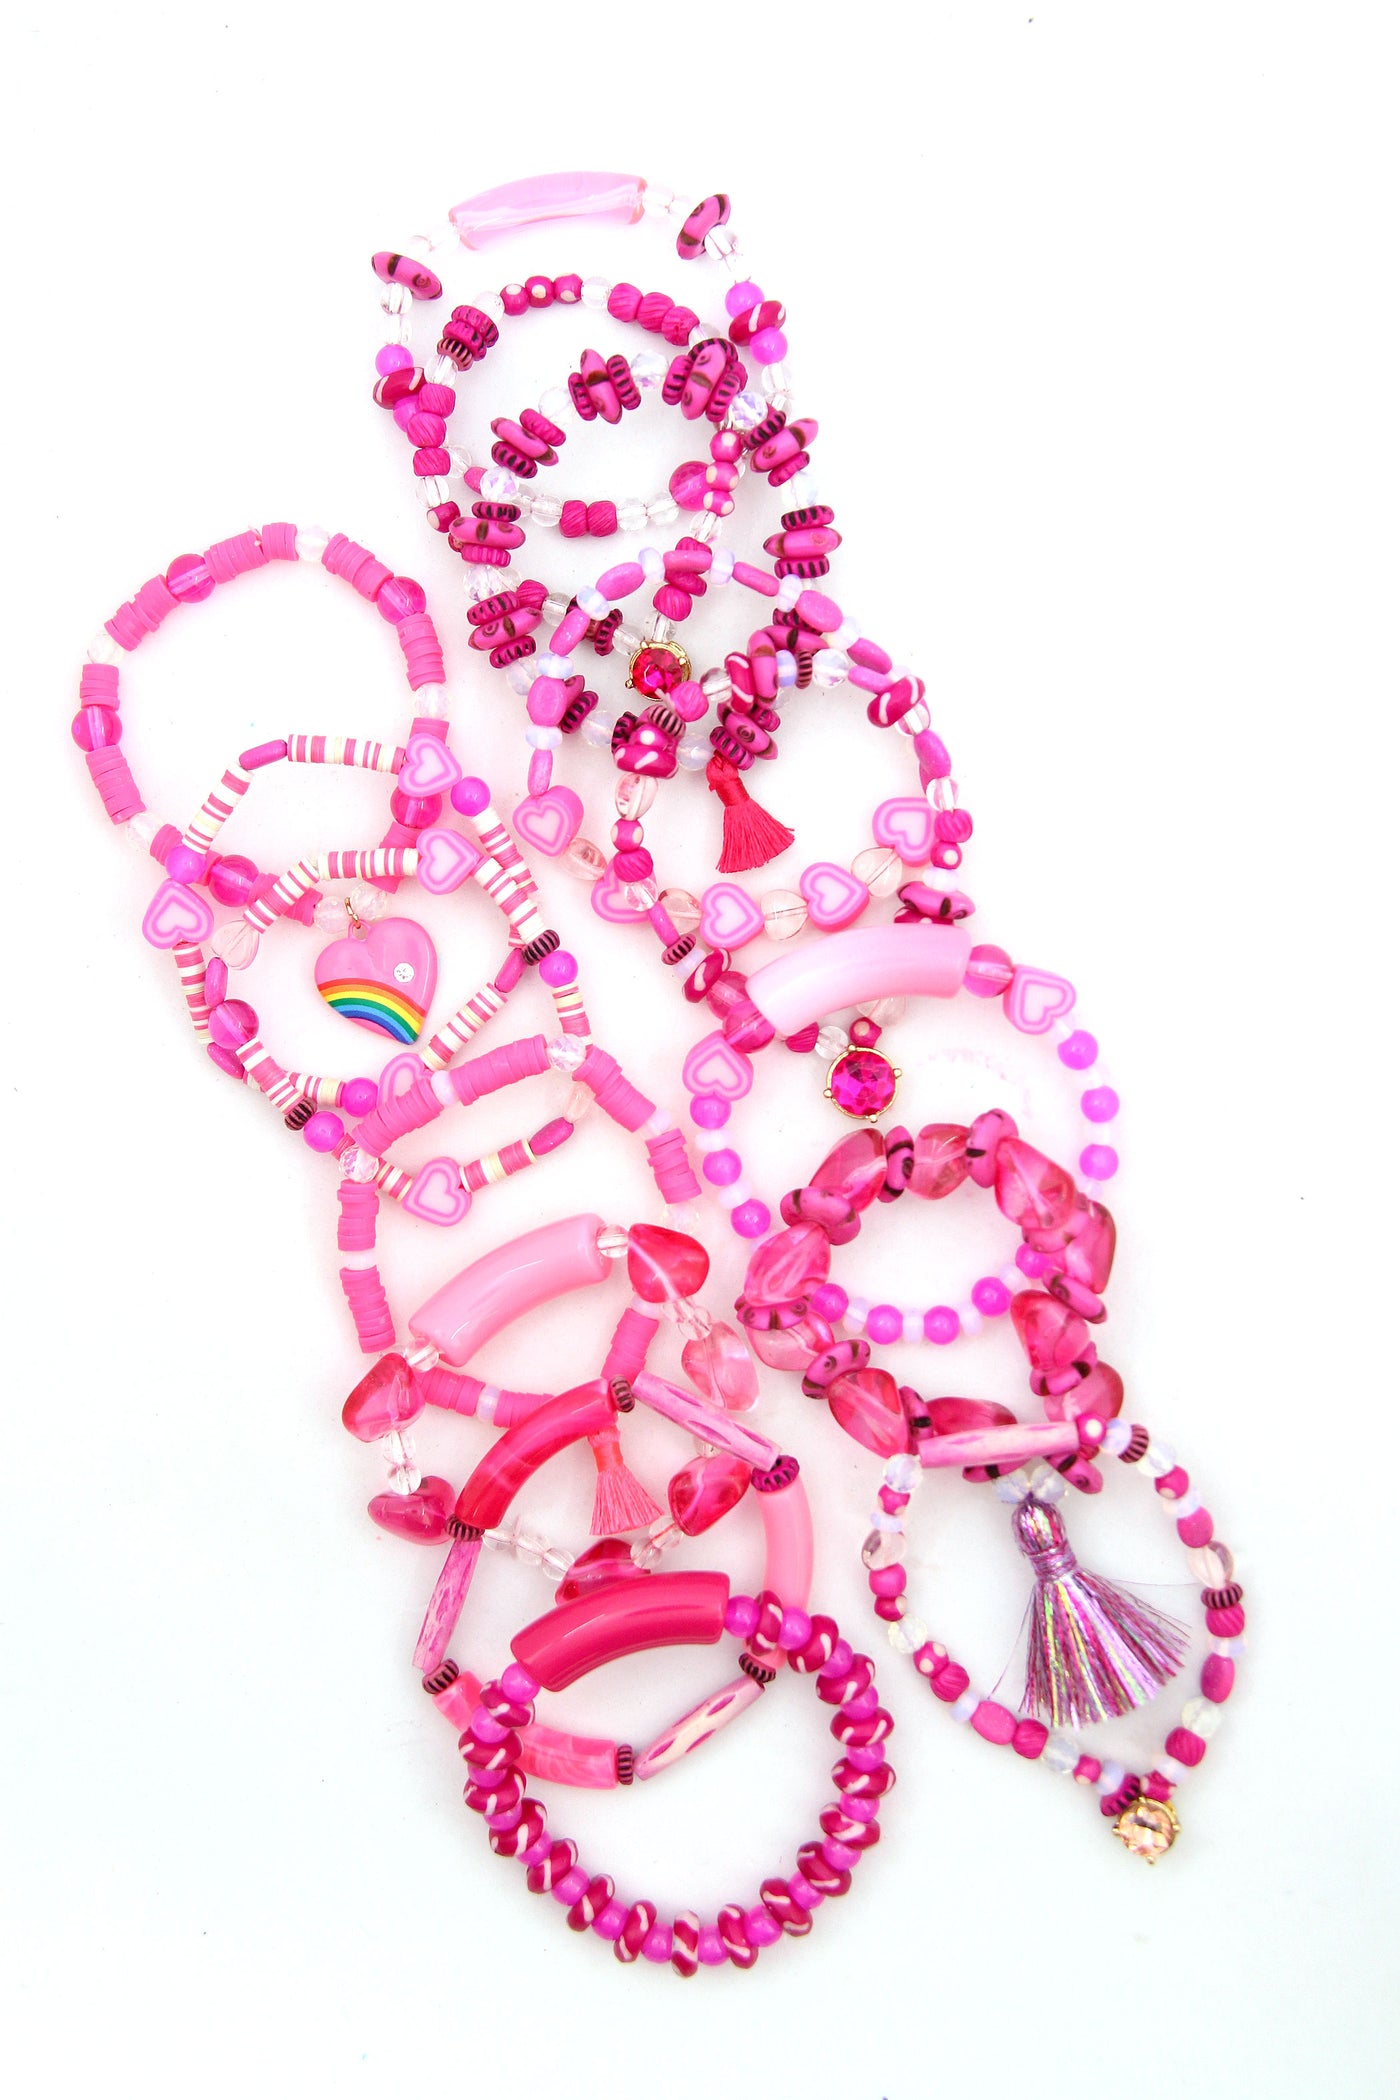 Life in plastic is fantastic, "Live Your Dream" with this hot pink bead bracelet kit